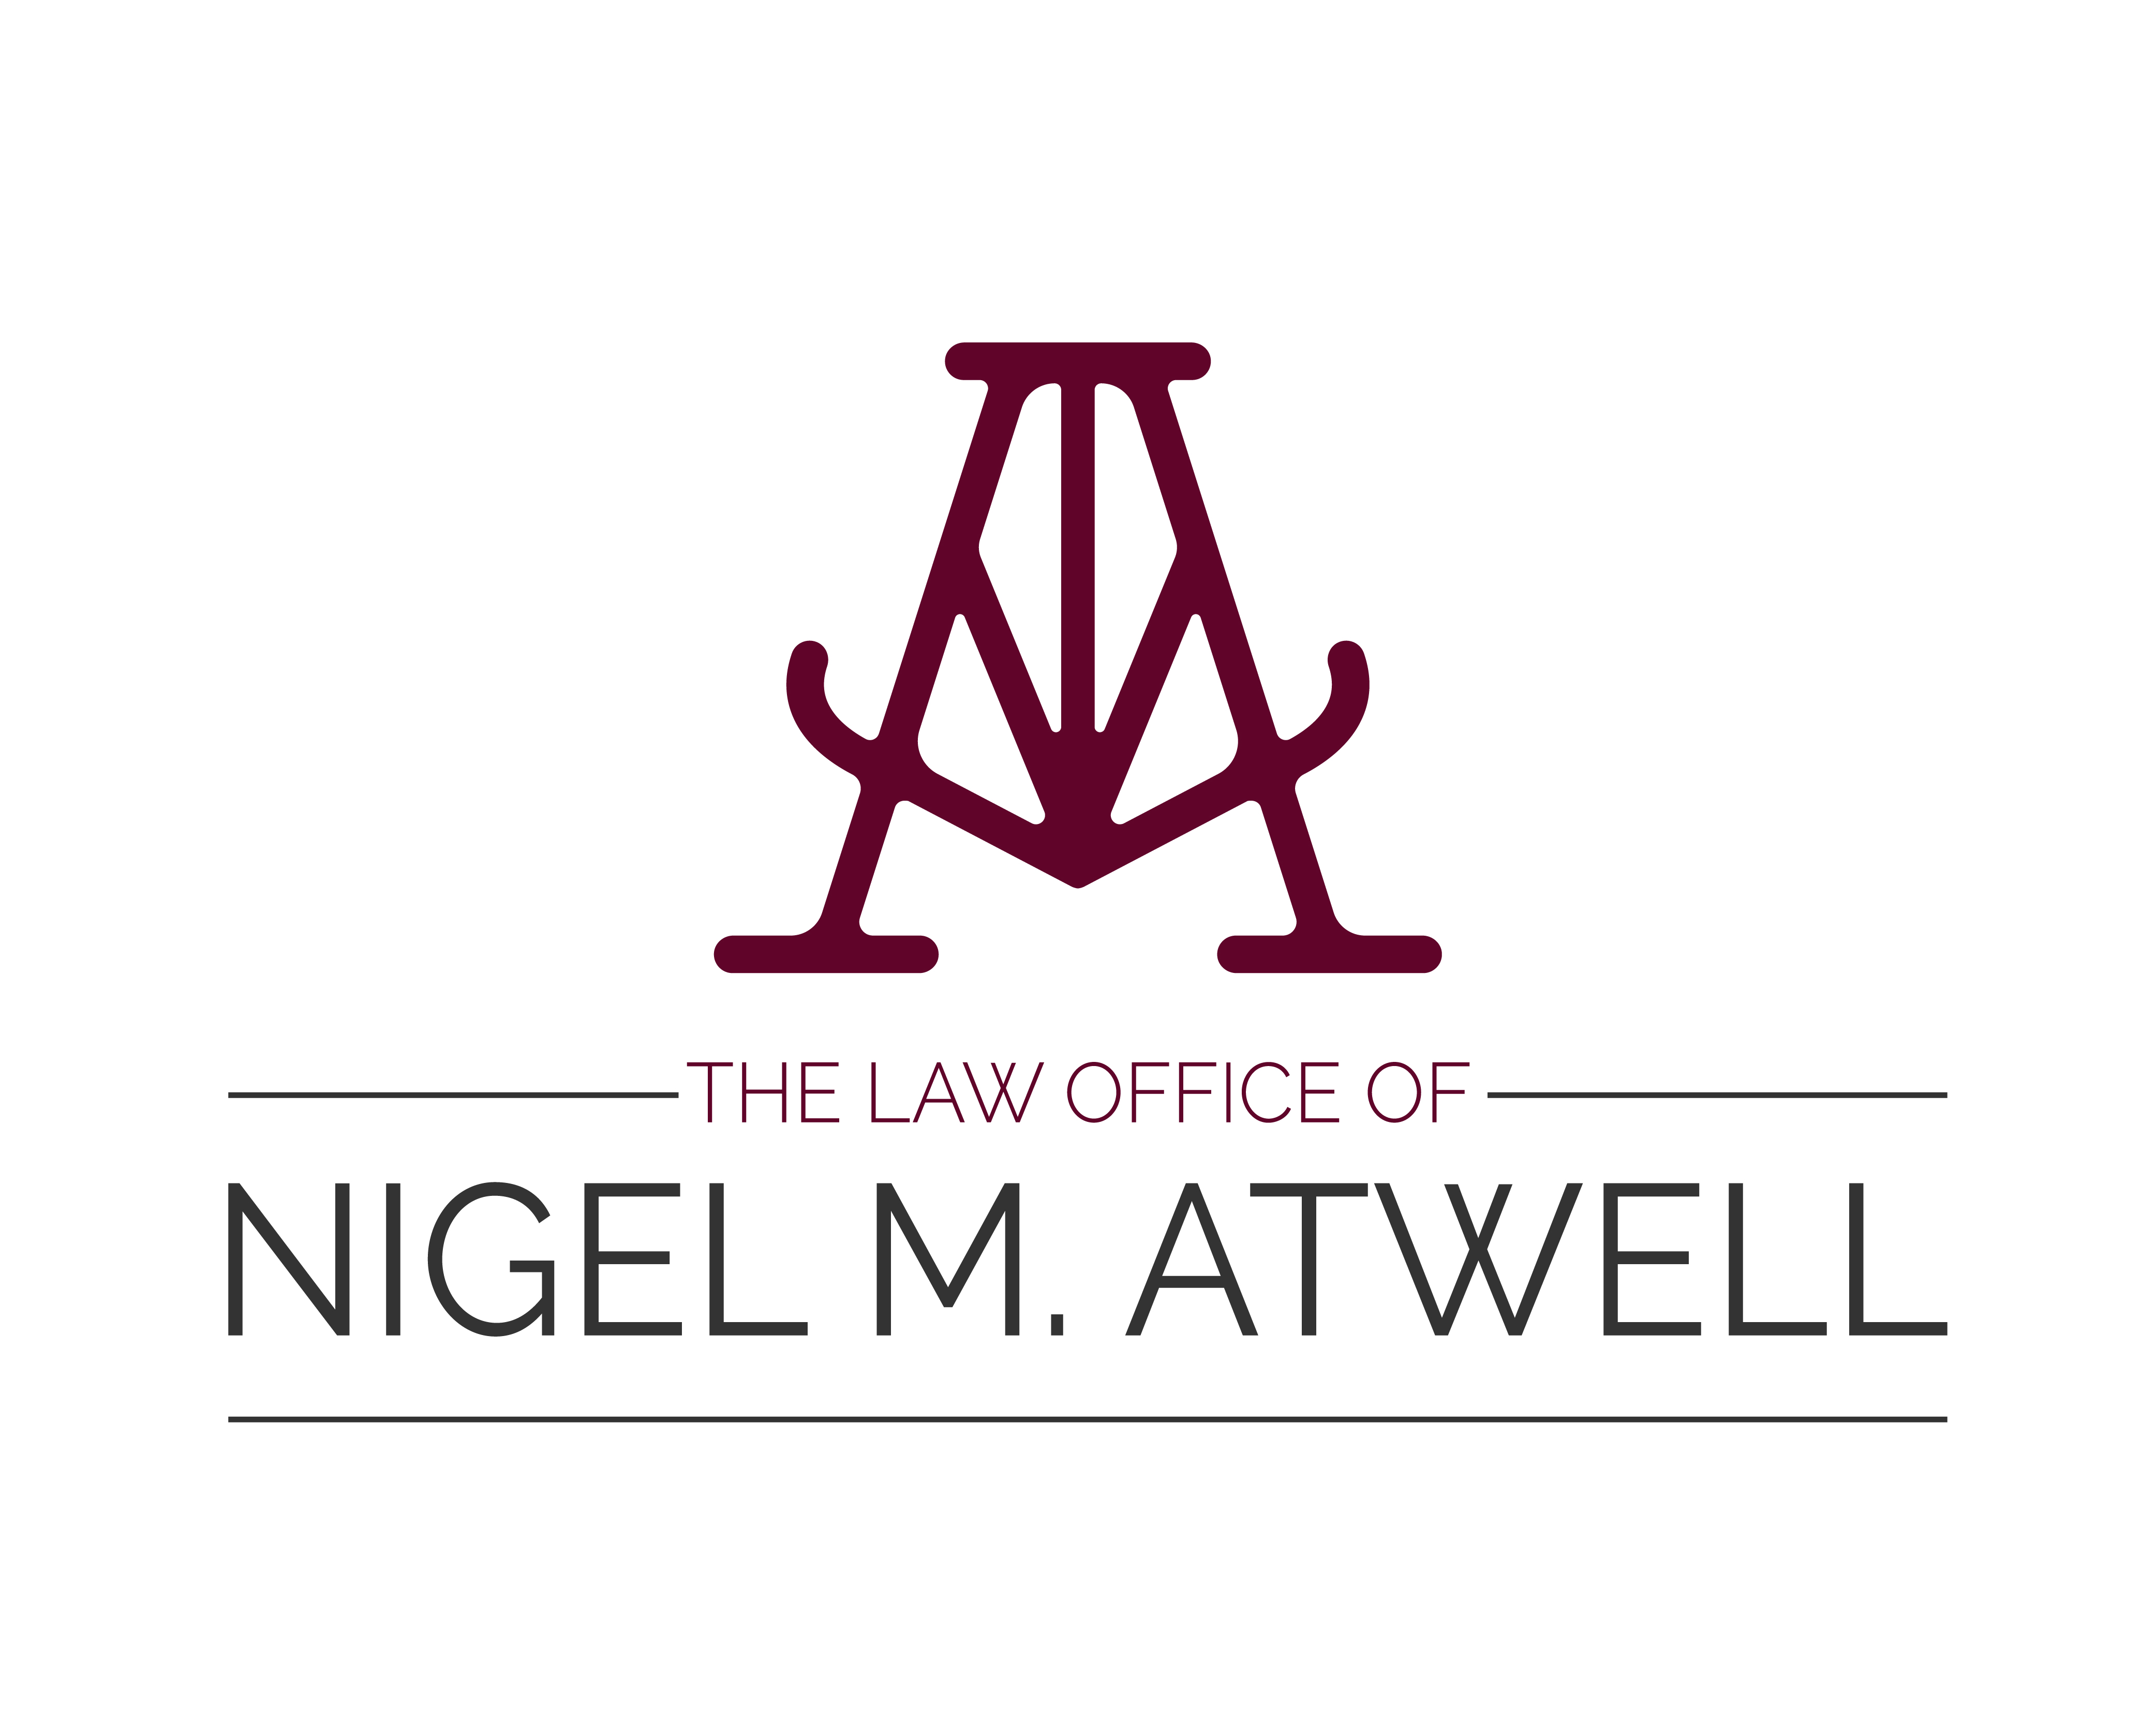 The Law Office of Nigel M. Atwell has opened in the City Center area of Washington, D.C.